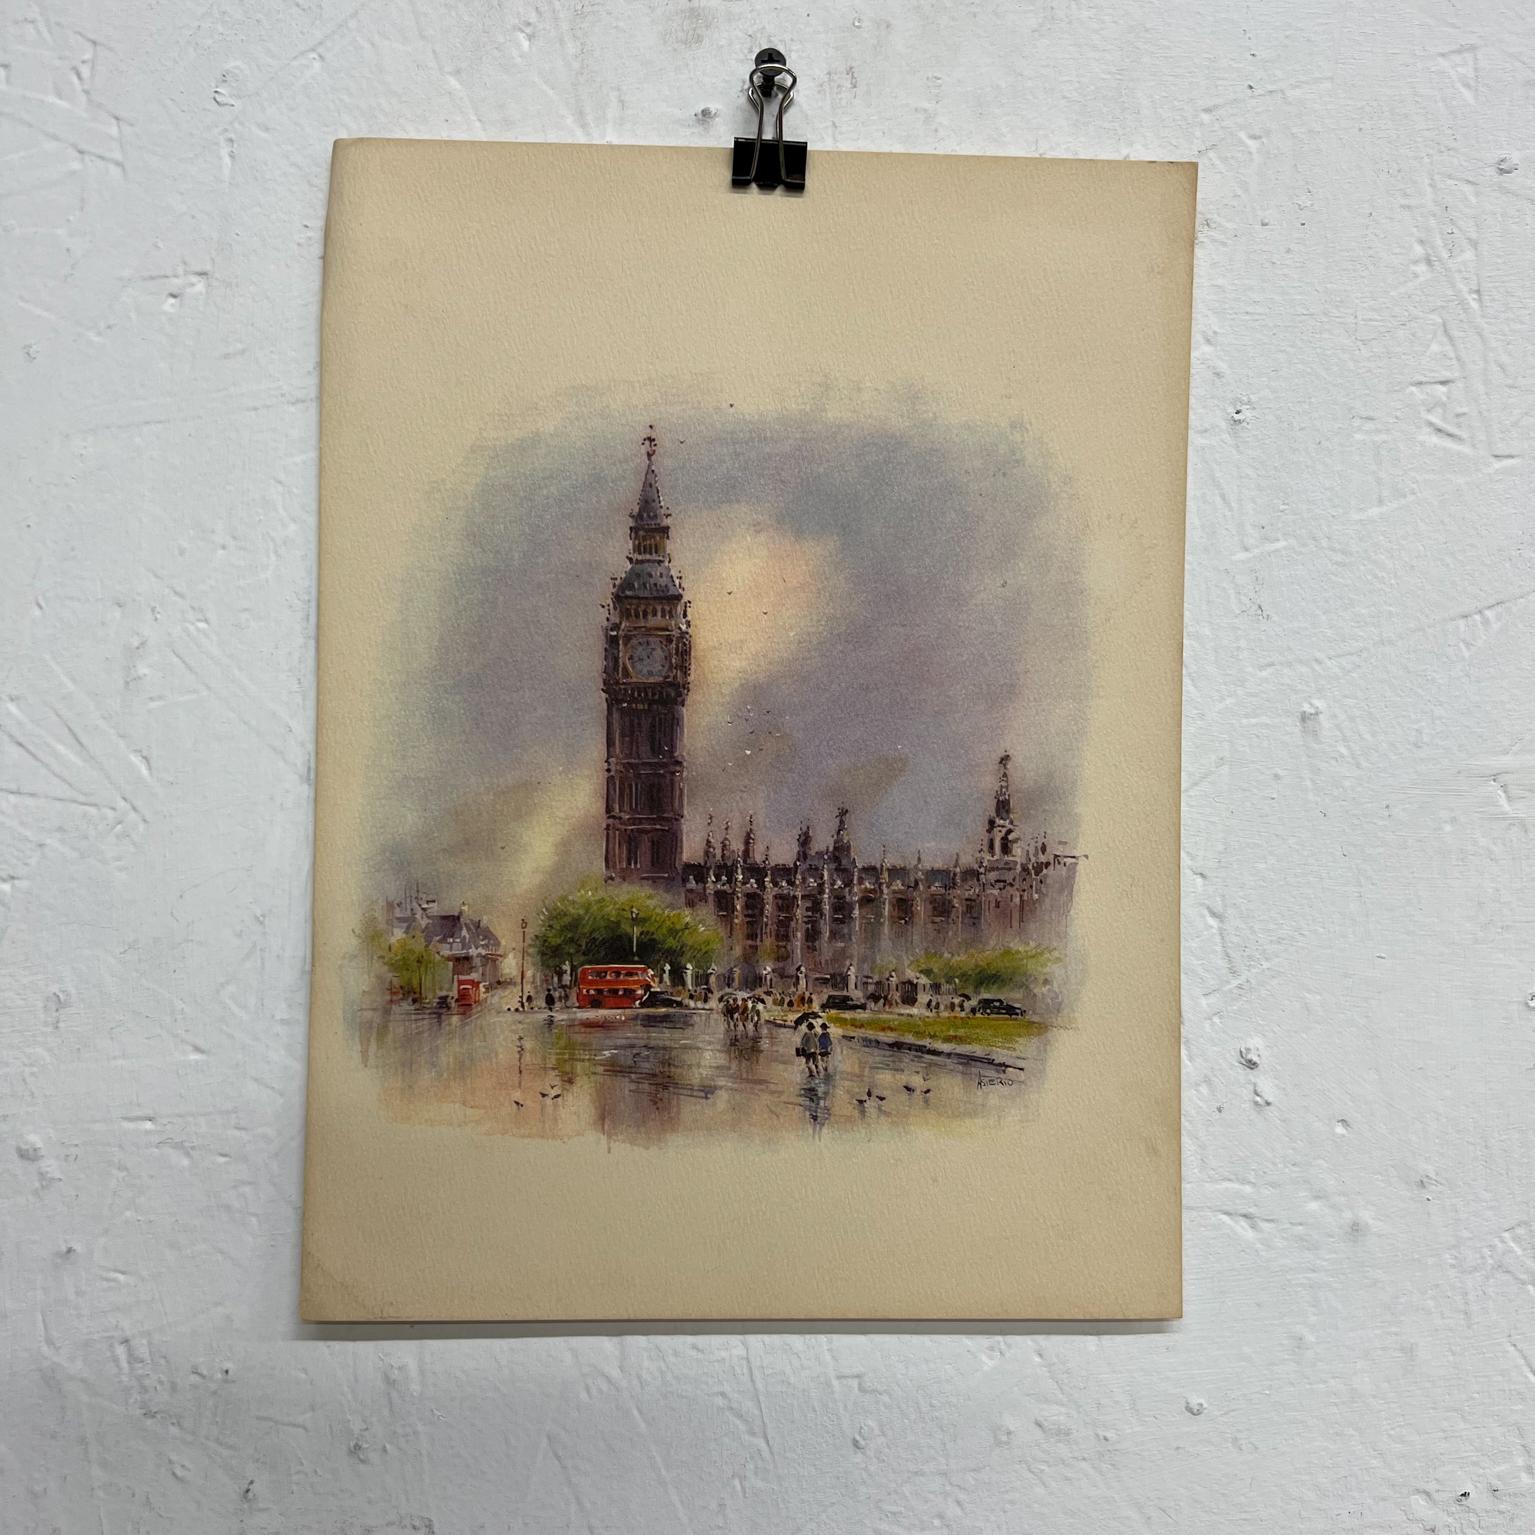 Asterio Pascolini 1960 Impressionist Lithograph London Big Ben Palace of Westminster London double decker bus.
12 x 16 art 11.75 x 13.75.
Preowned original unrestored condition vintage art. Unframed.
Refer to images.

